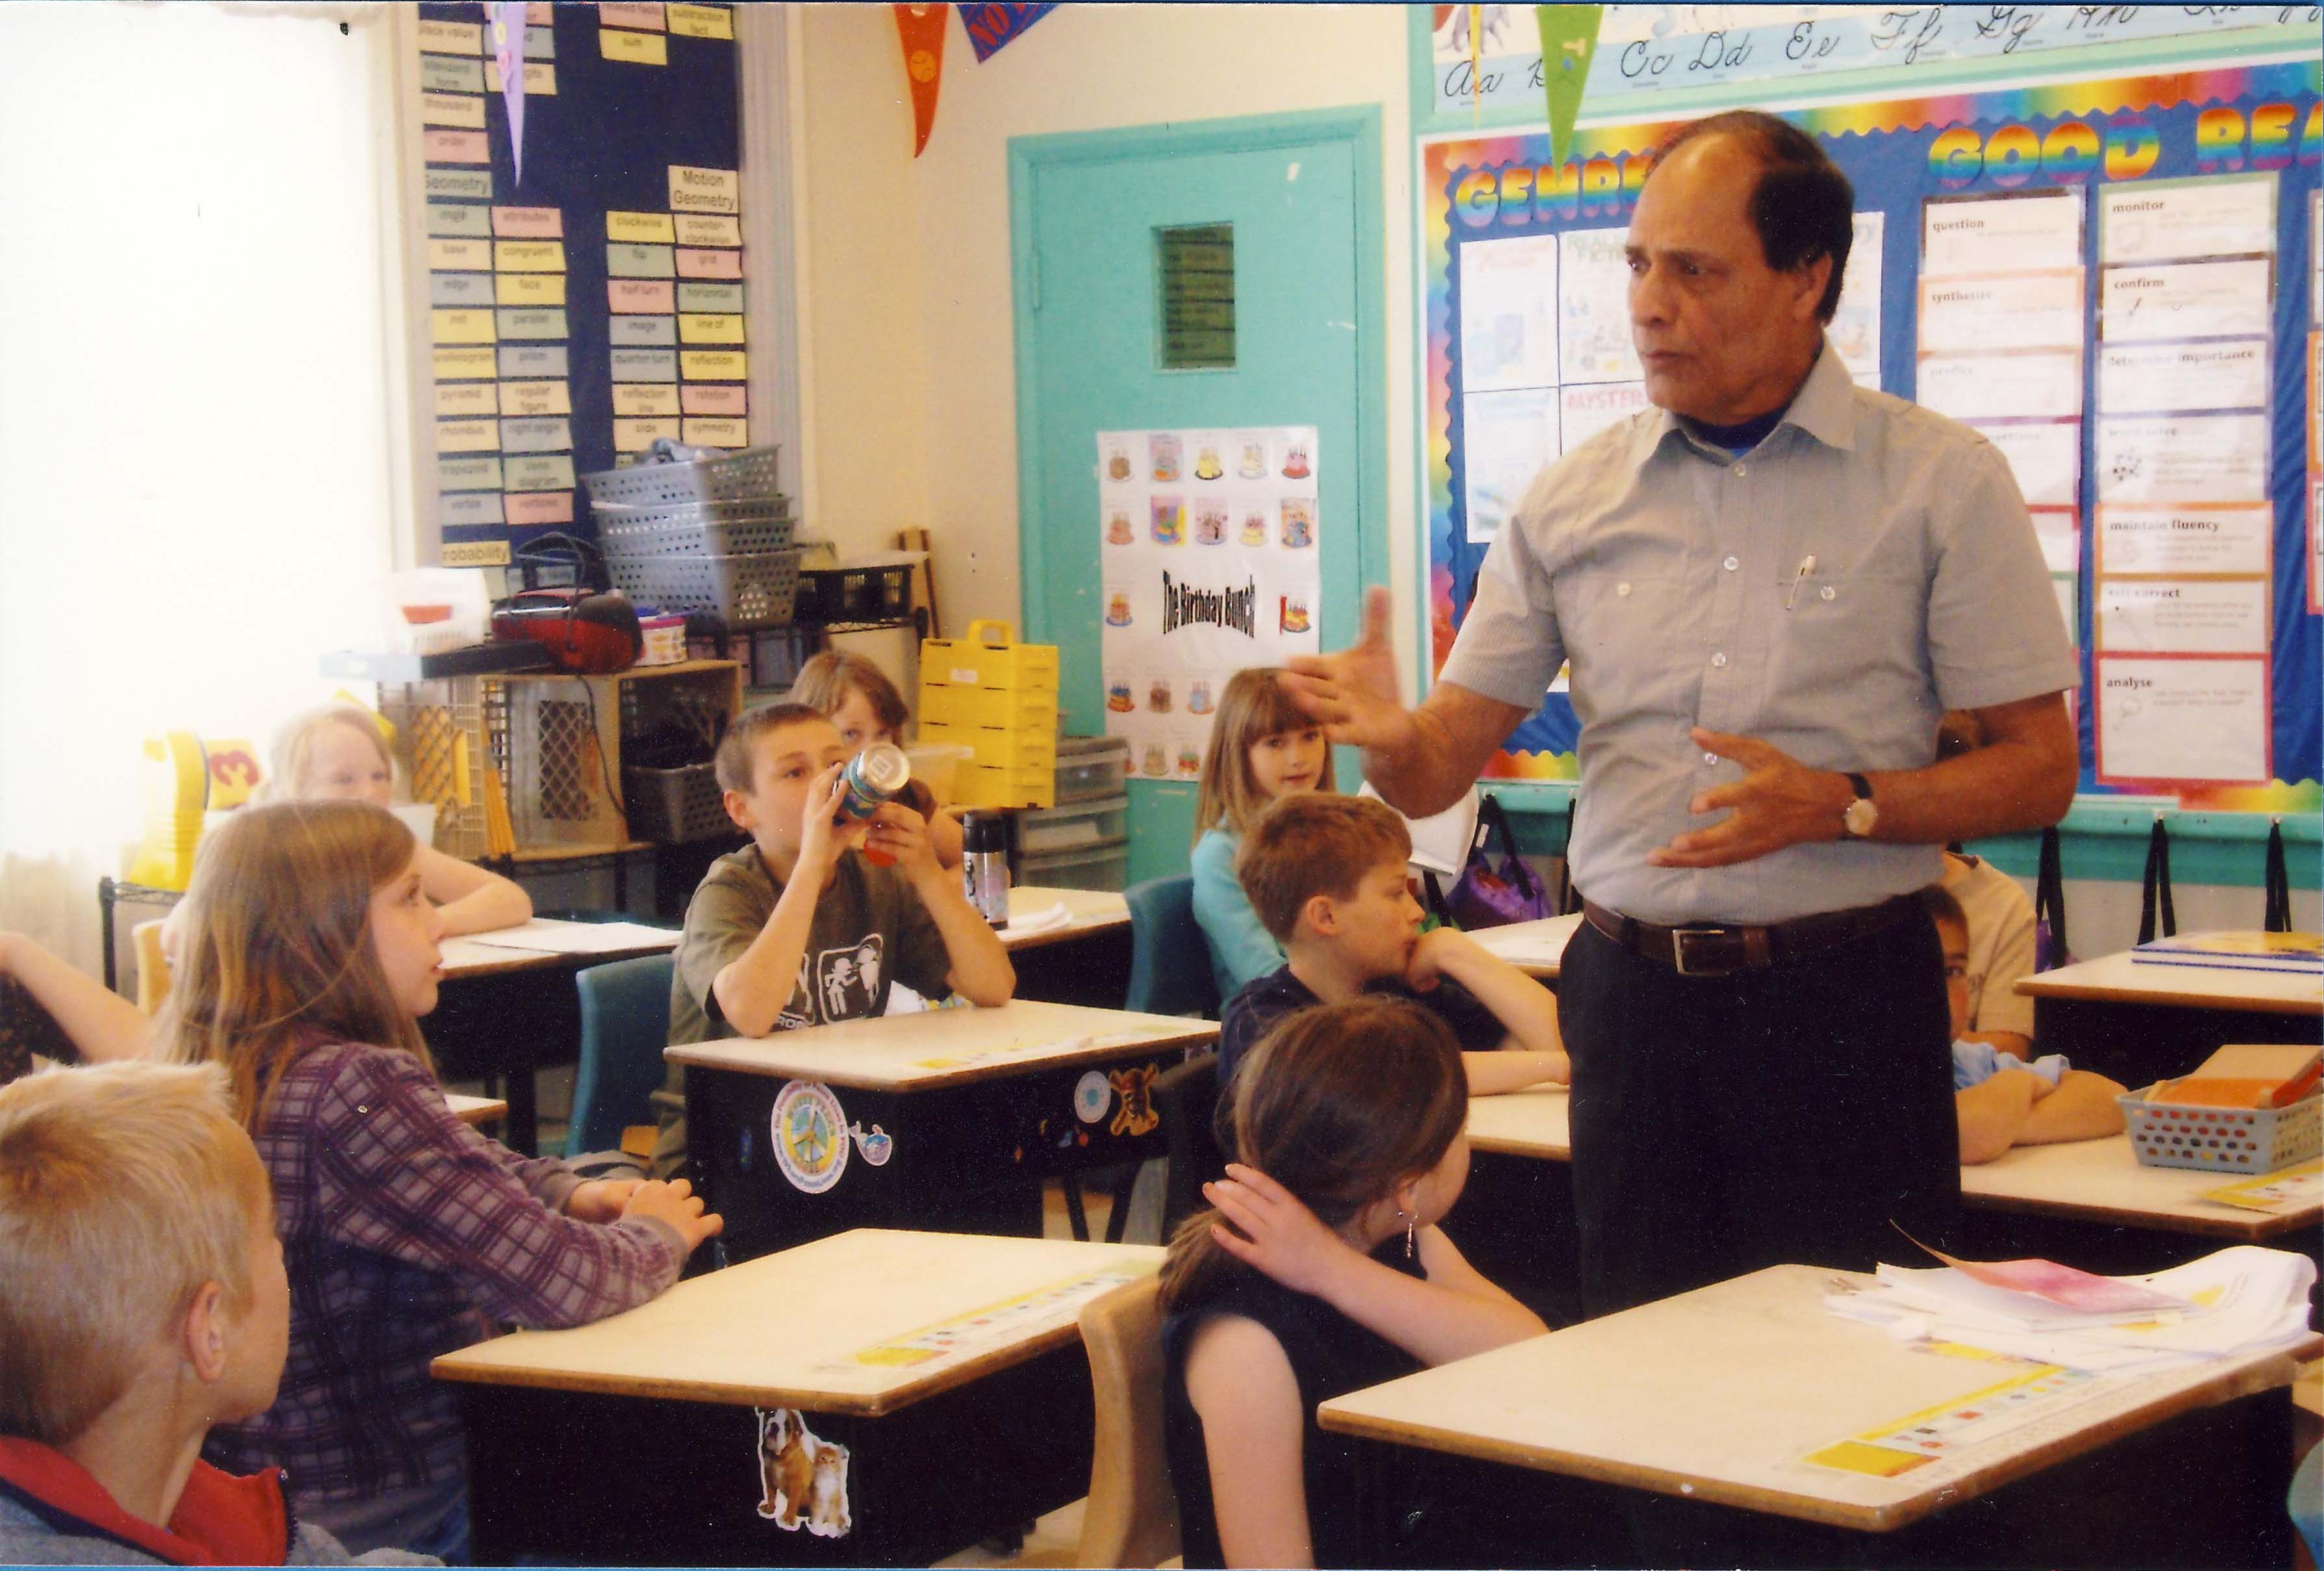 A man teaches class of young students.